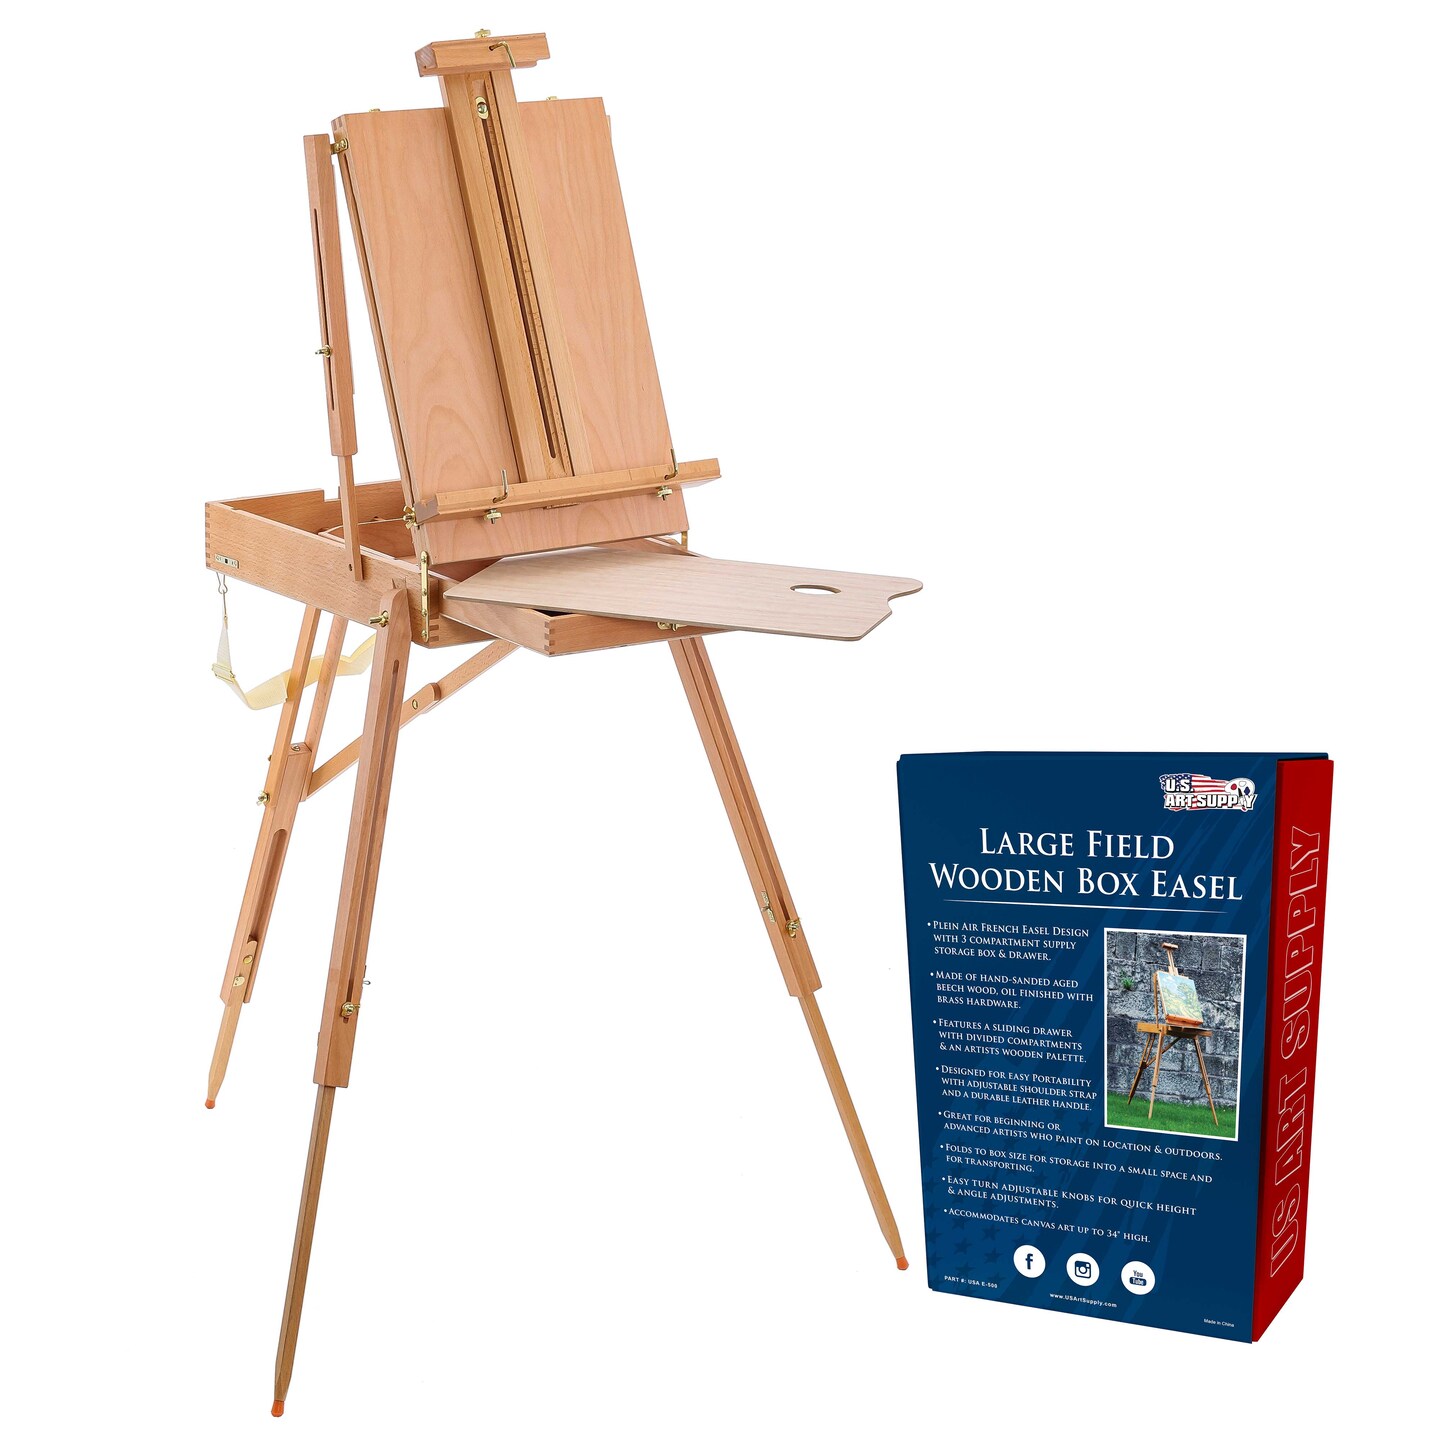 Coronado Large Wooden French Style Field &#x26; Studio Sketchbox Easel with Artist Drawer, Palette, Premium Beechwood - Adjustable Wood Tripod Easel Stand